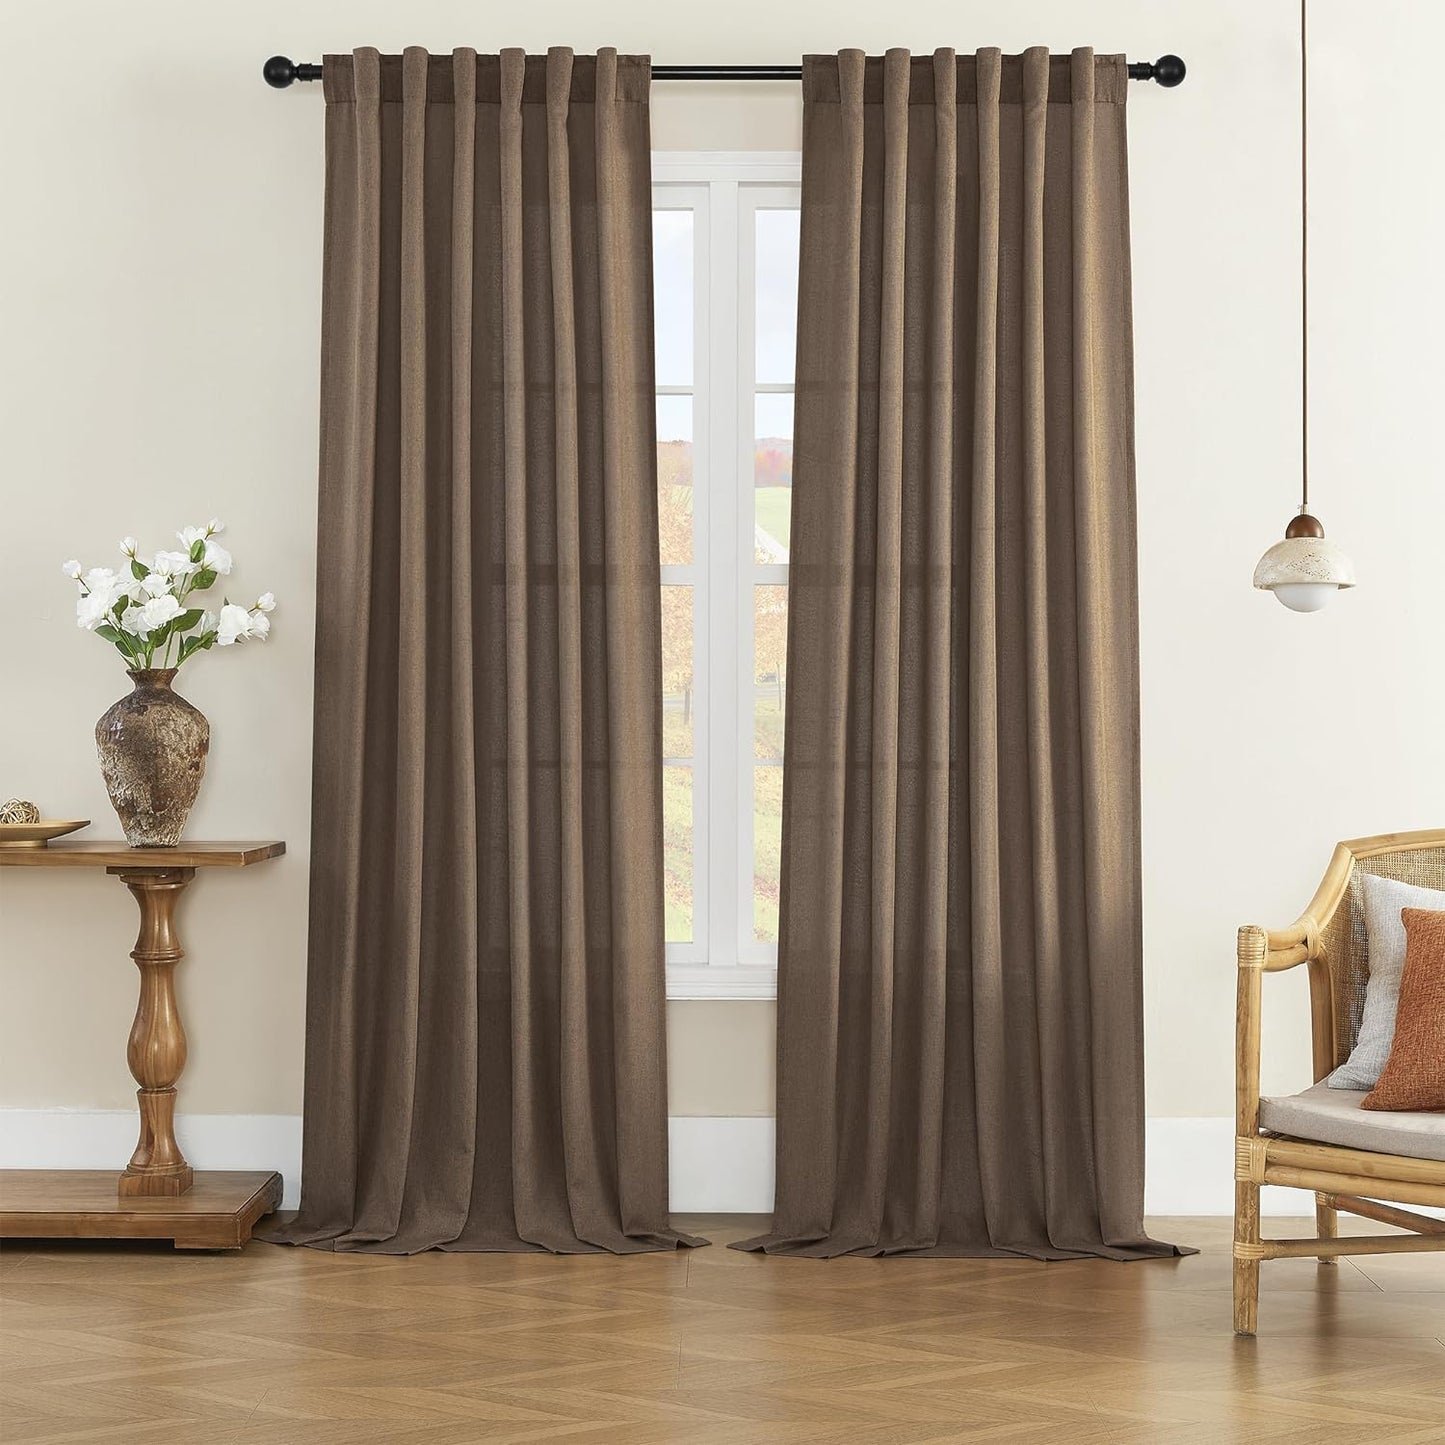 Linen Sheer Window Curtains, Rod Pocket & Back Tab Modern Semi Sheer Panels Privacy with Light Filter Linen Drapes for Sliding Glass Door/Living Room, W60 X L84, 2 Pieces  DONREN Brown 60X96 